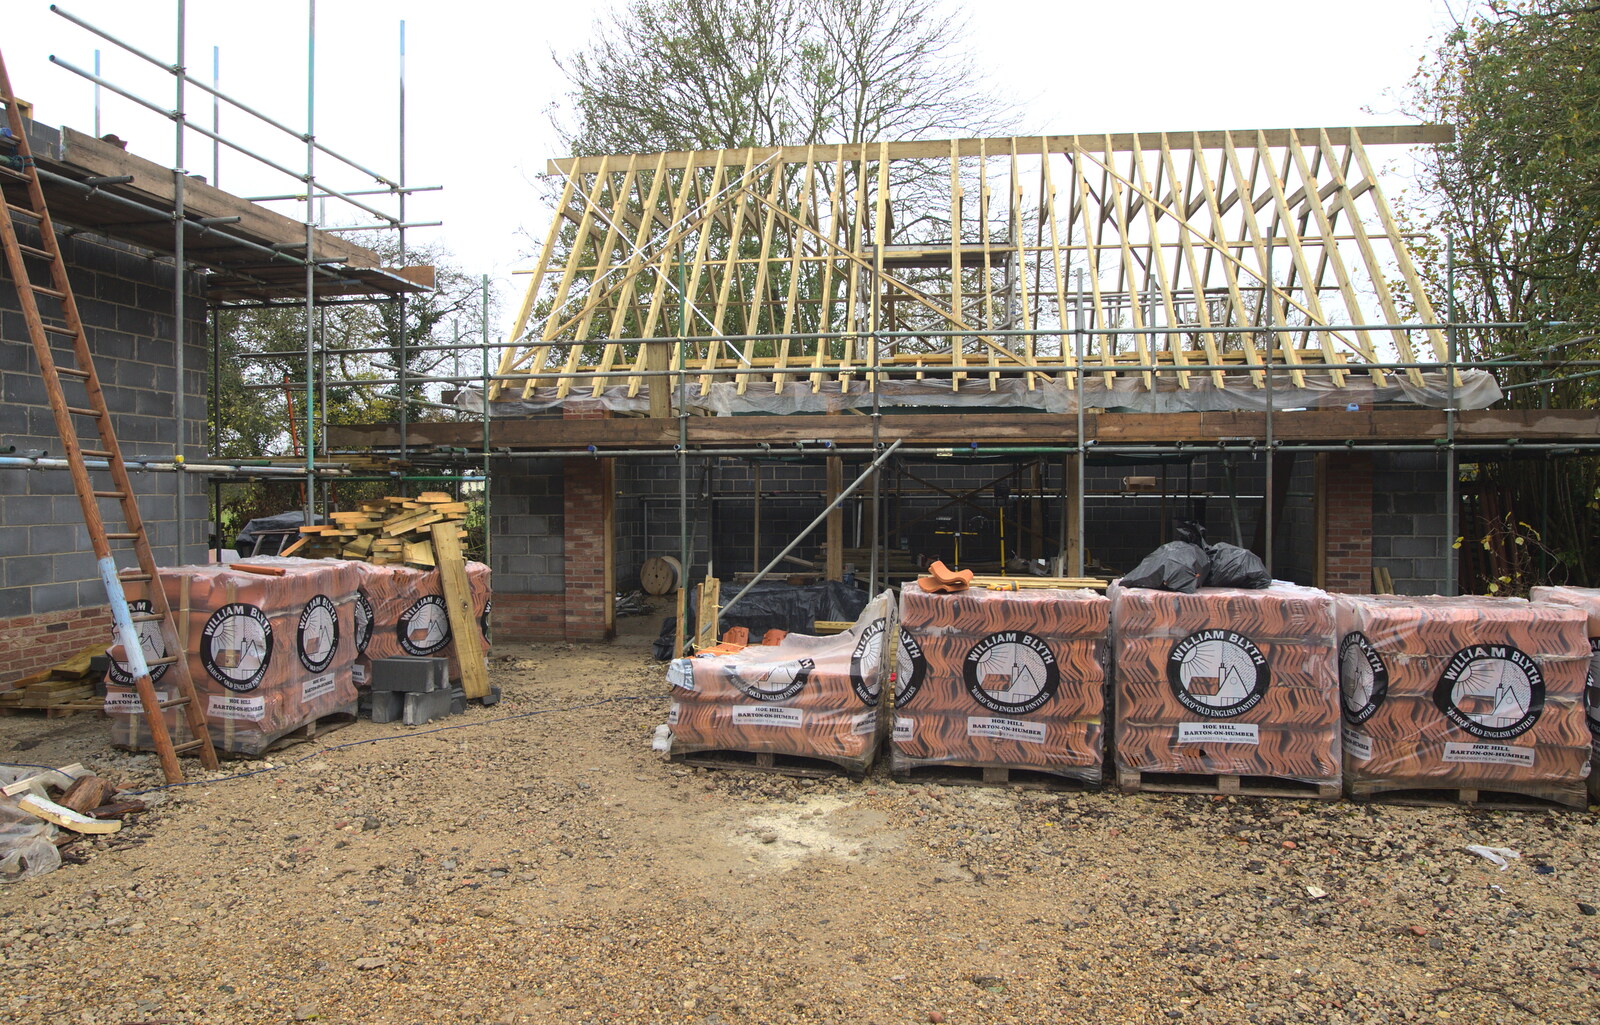 More Building and Palgrave Playground, Suffolk - 24th November 2013: Pallets of tiles ready for the new garage roof